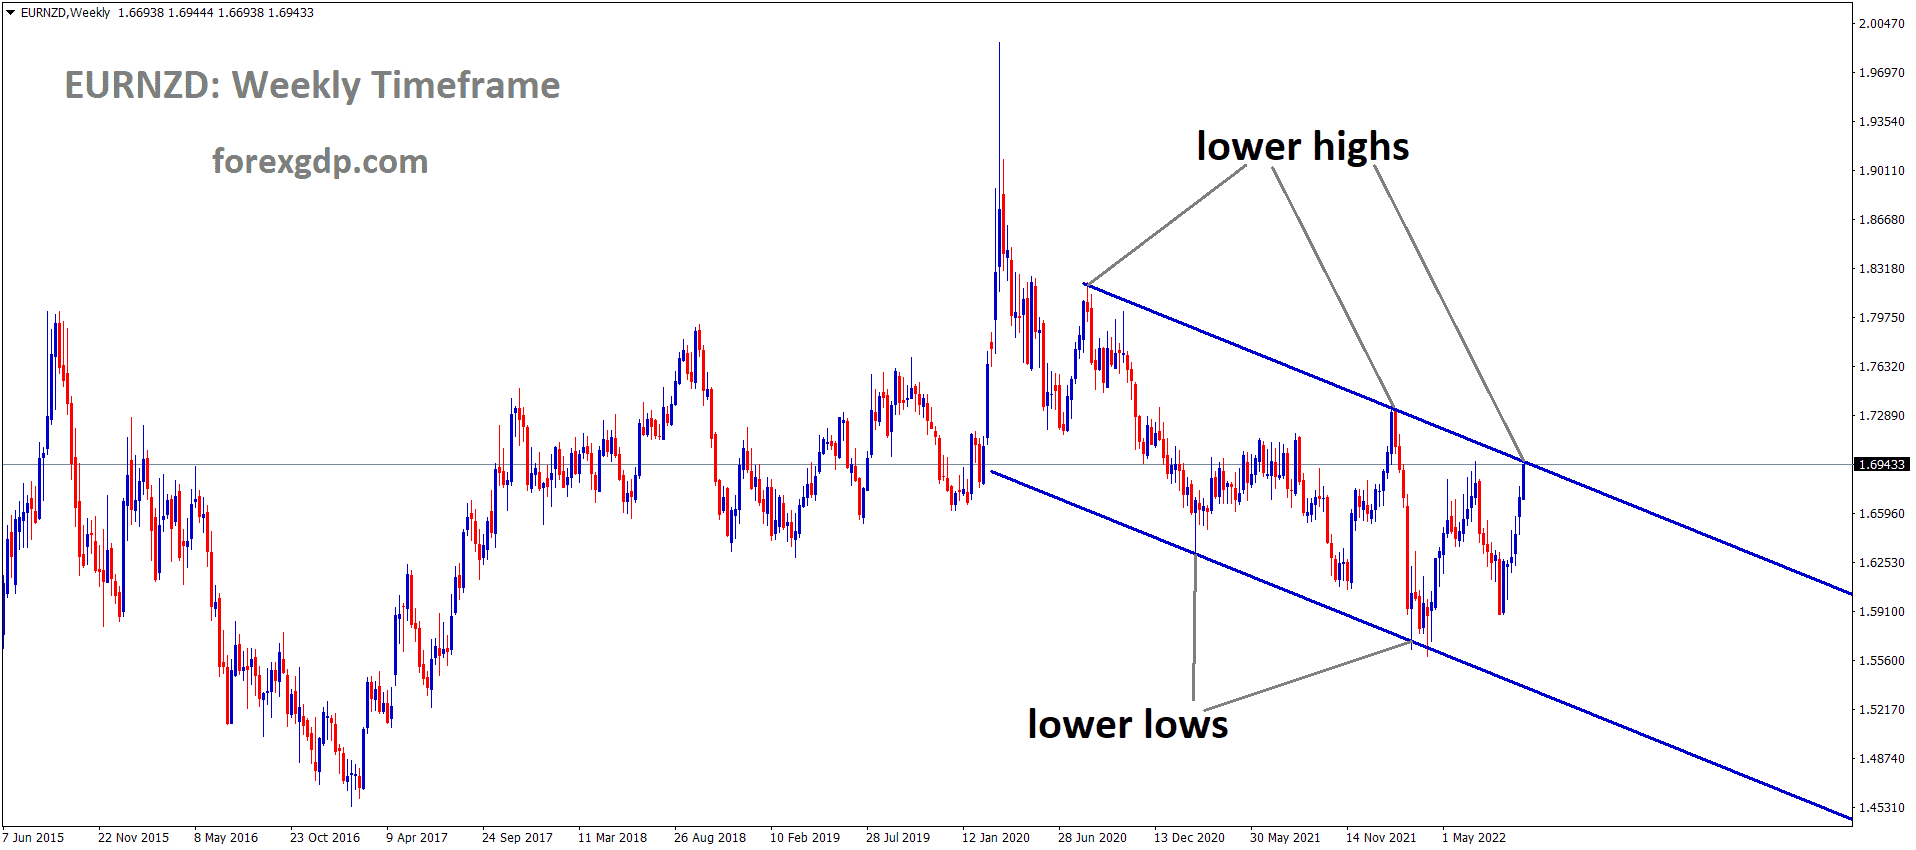 EURNZD is moving in the Descending channel and the market has reached the Lower high area of the channel